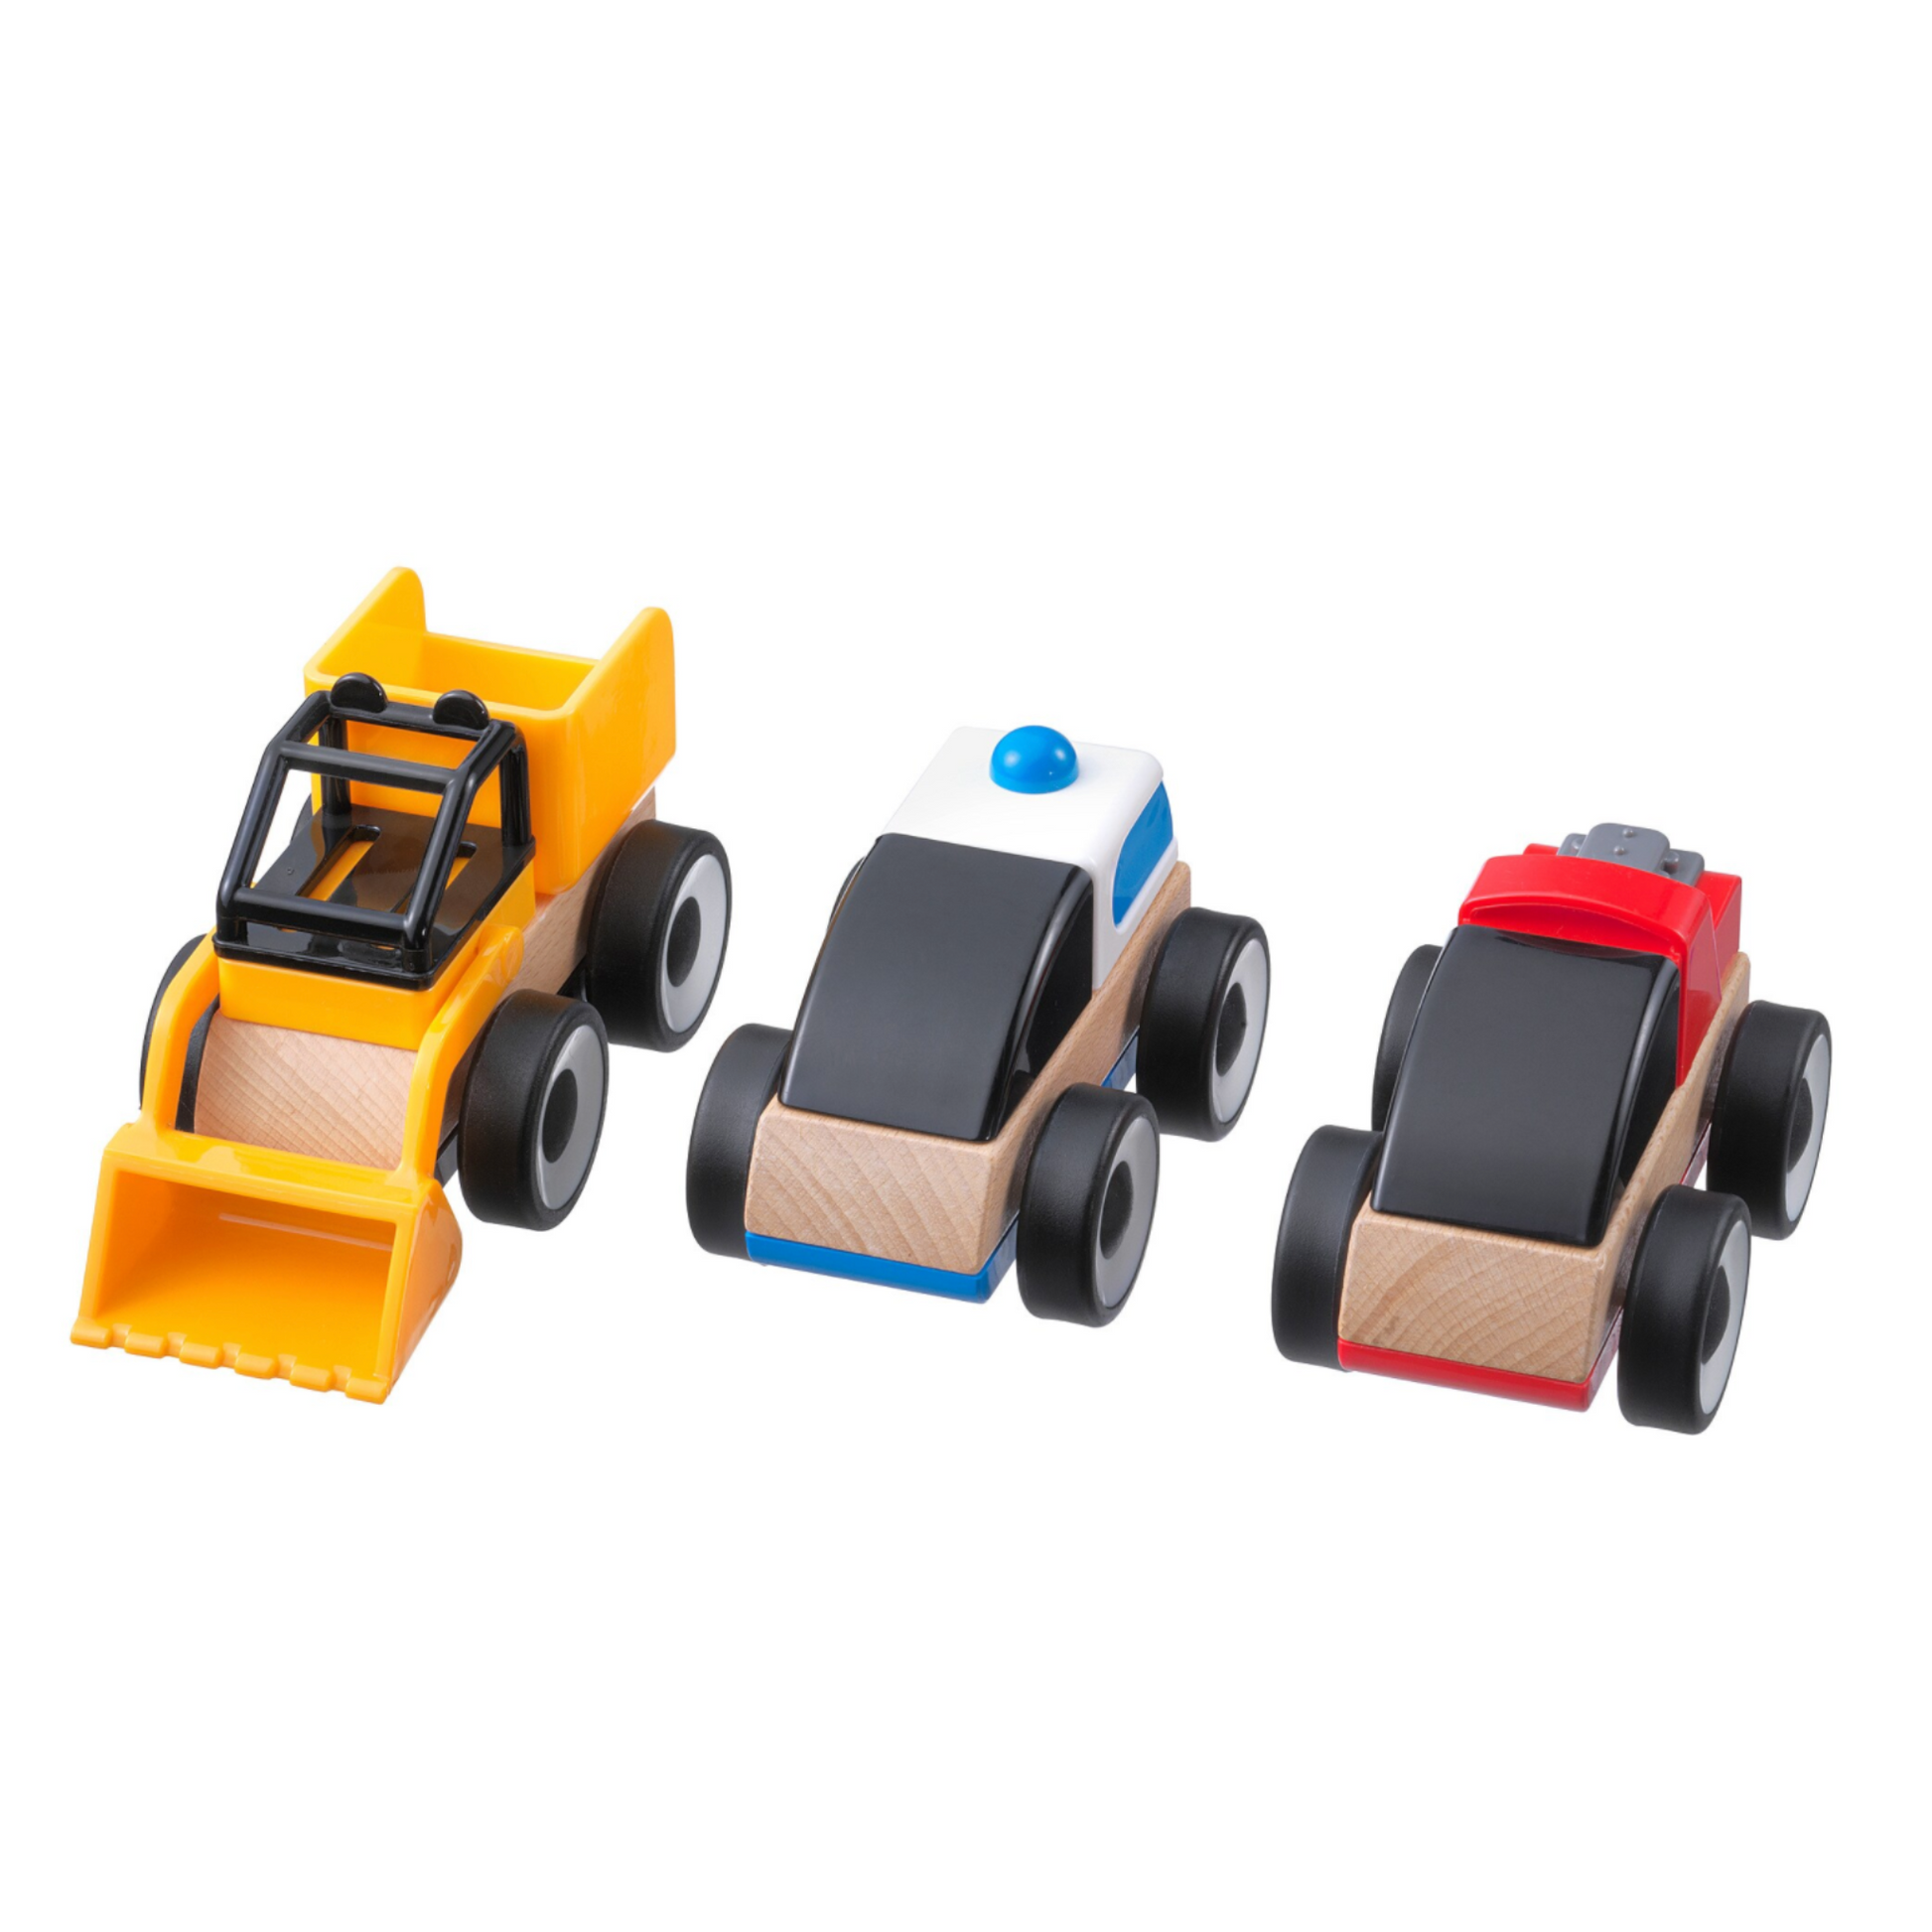 IKEA Lillabo Toy Vehicles, 3-Pack (4620768182337)